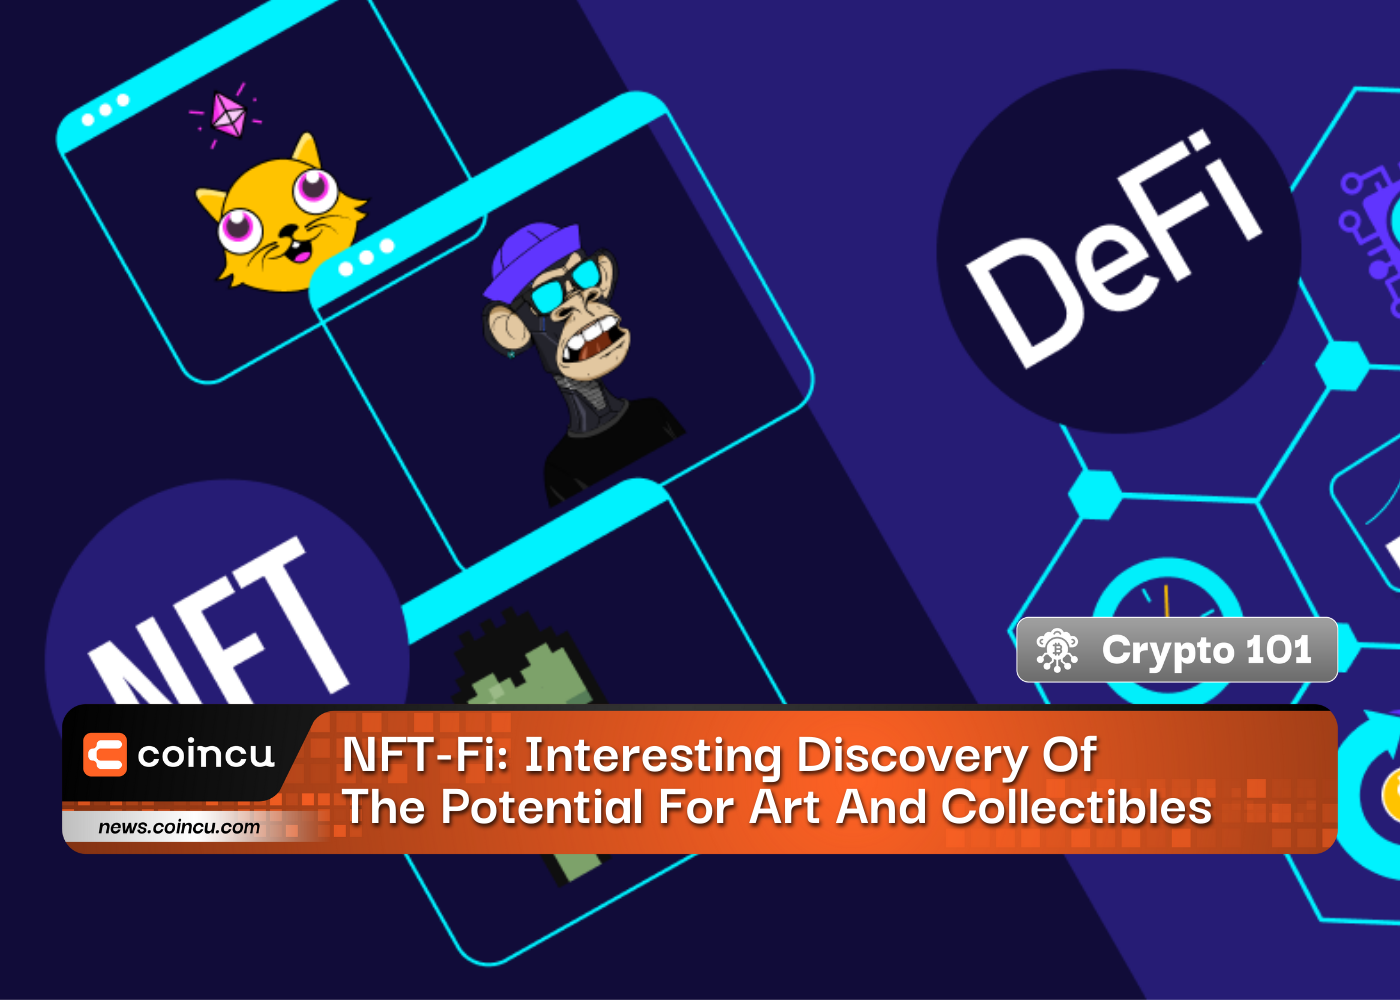 NFT-Fi: Interesting Discovery Of The Potential For Art And Collectibles